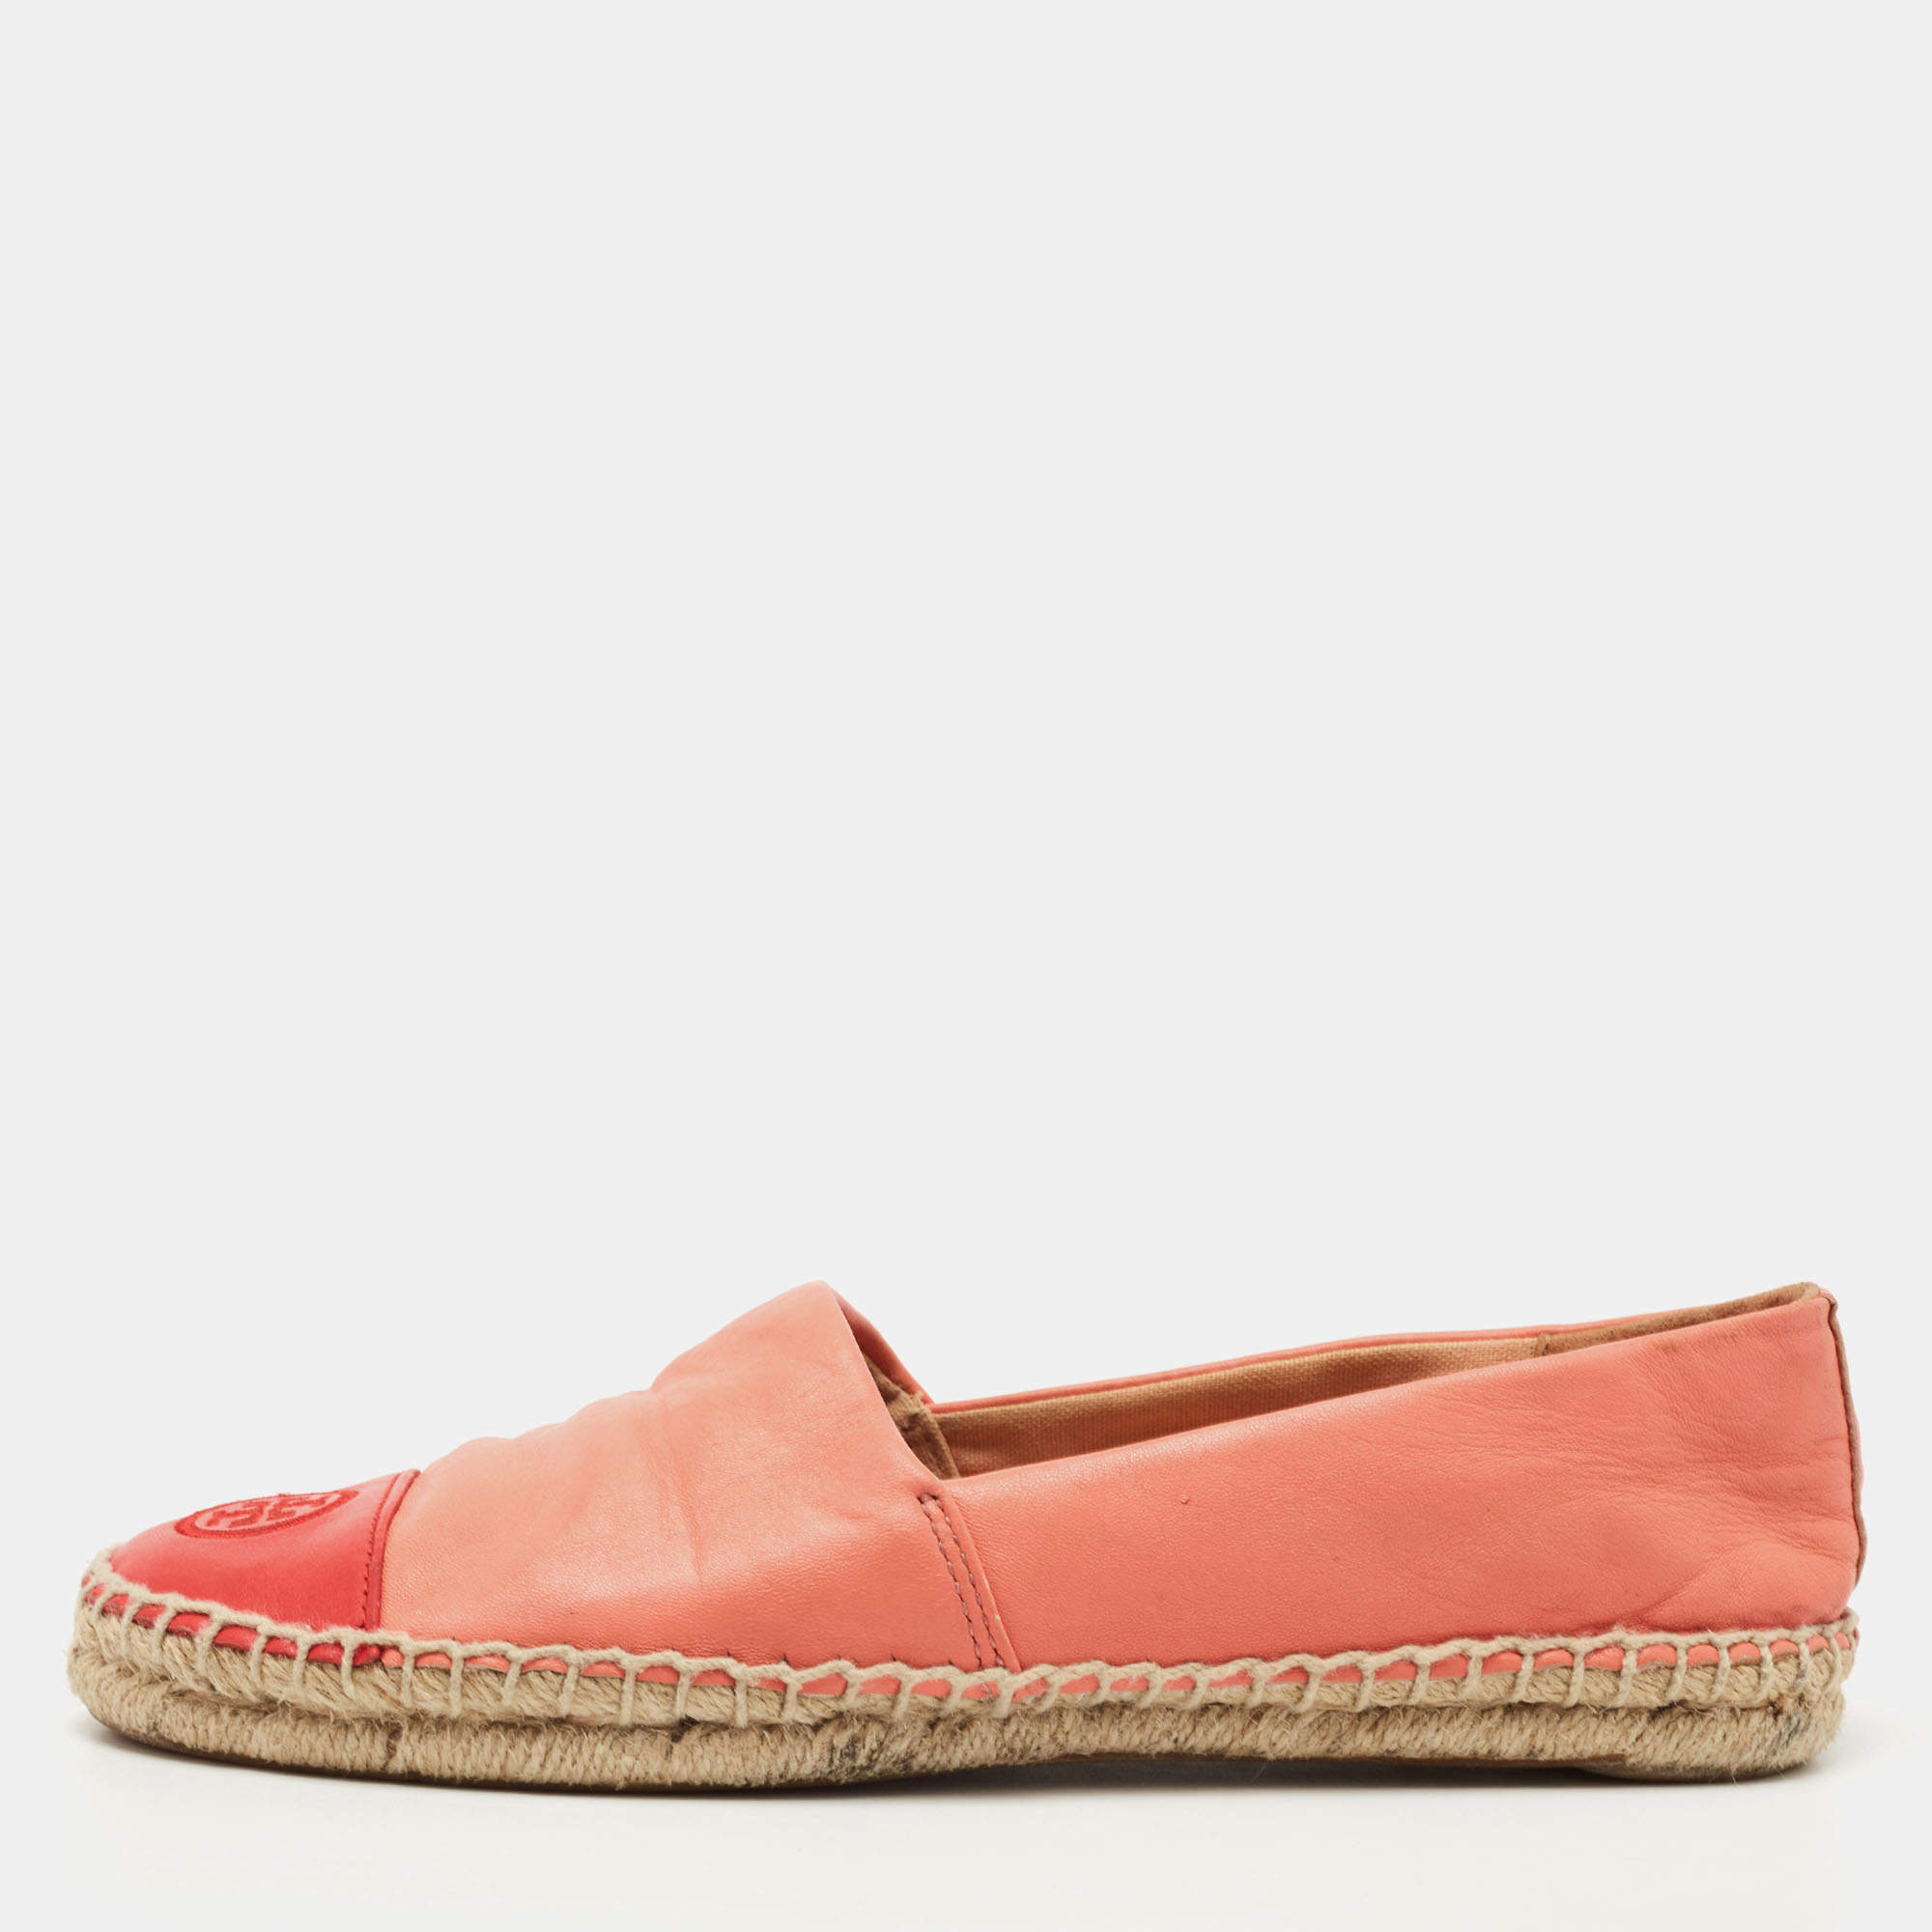 Tory Burch Pink/Red Leather Flat Espadrilles Size 38 Tory Burch | TLC